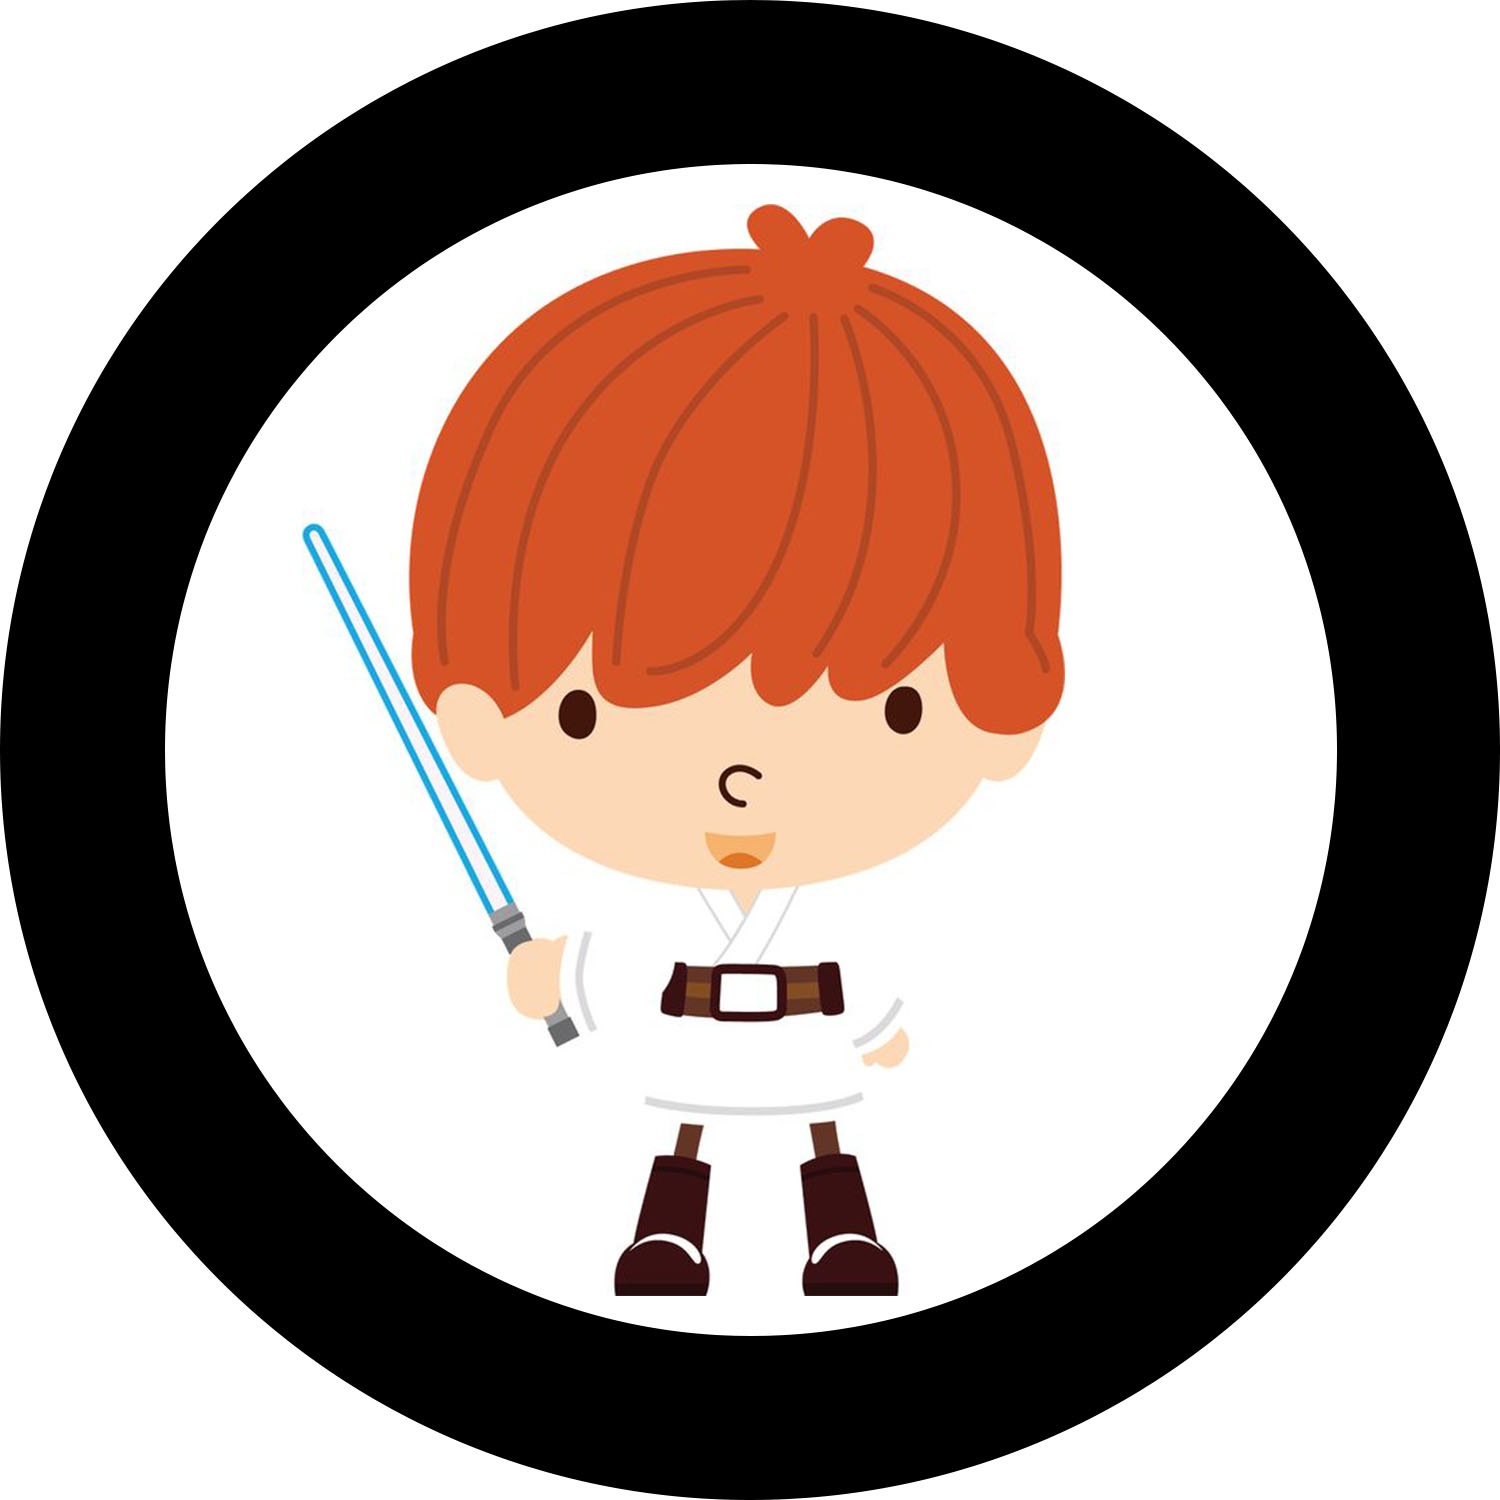 Star Wars Babies: Free Printable Toppers And Wrappers For Cupcakes - Free Printable Train Cupcake Toppers